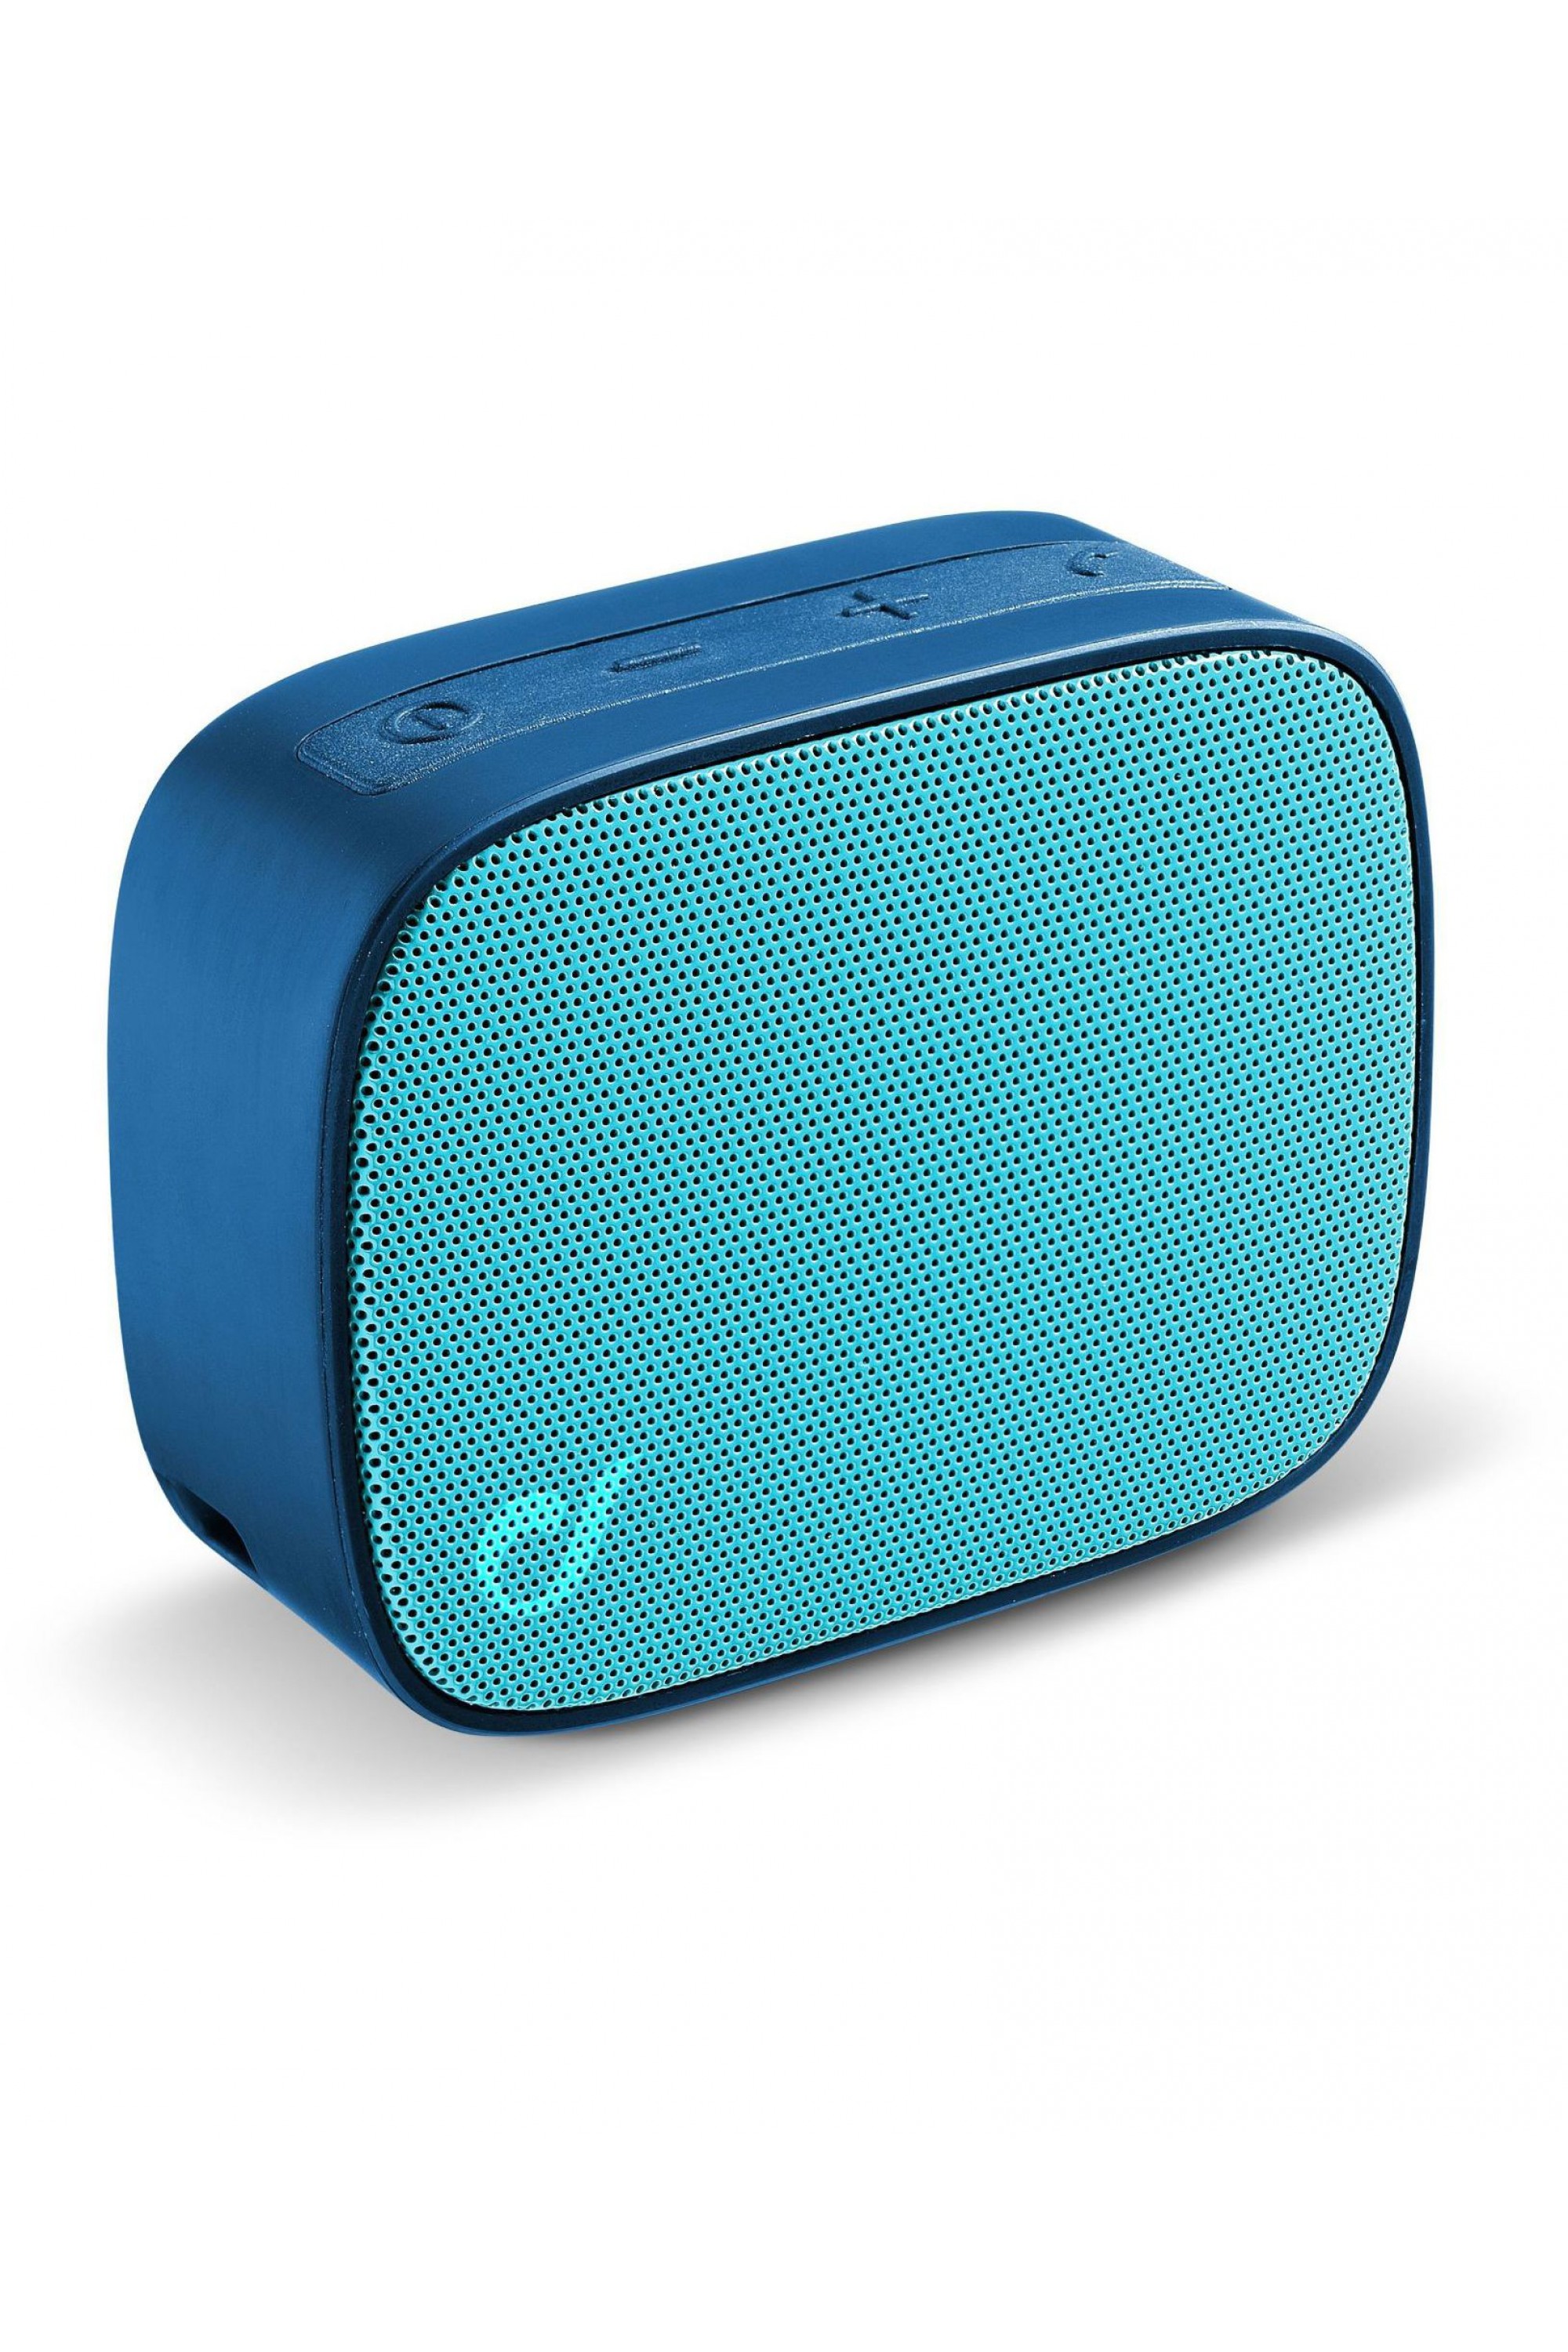 Cellularline Fizzy Turquoise Speakers Portable Bluetooth 